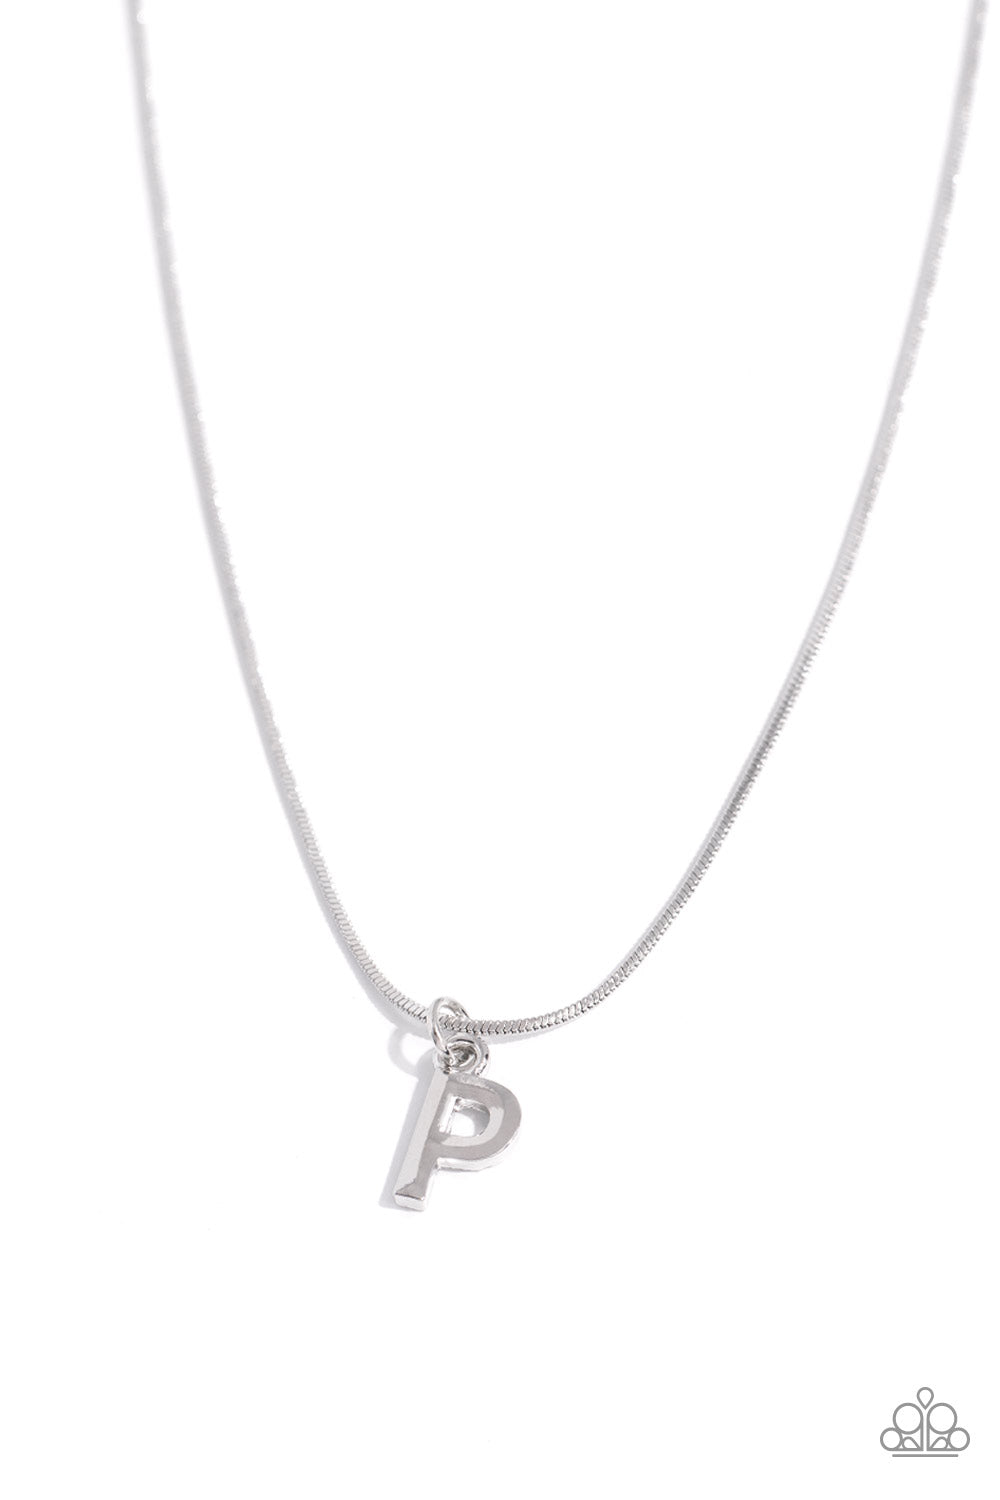 Seize the Initial Paparazzi Accessories Necklaces with Earrings - Silver - P